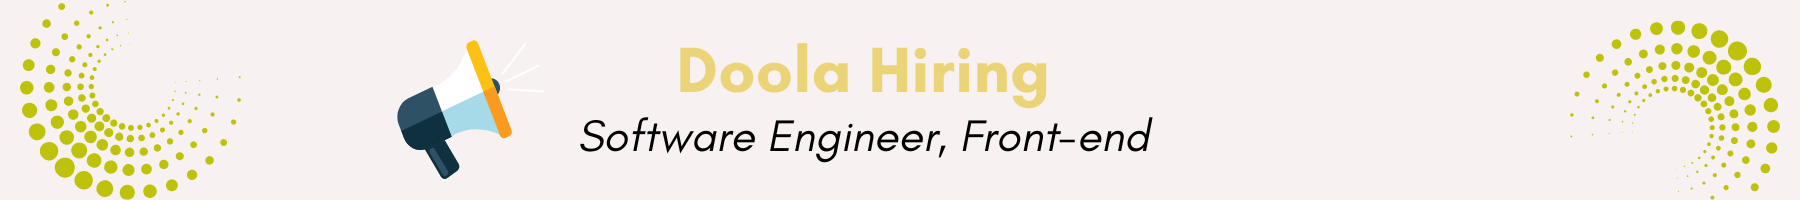 Yellow White Minimalist We Are Hiring Banner (1800 x 200 px) (4).png